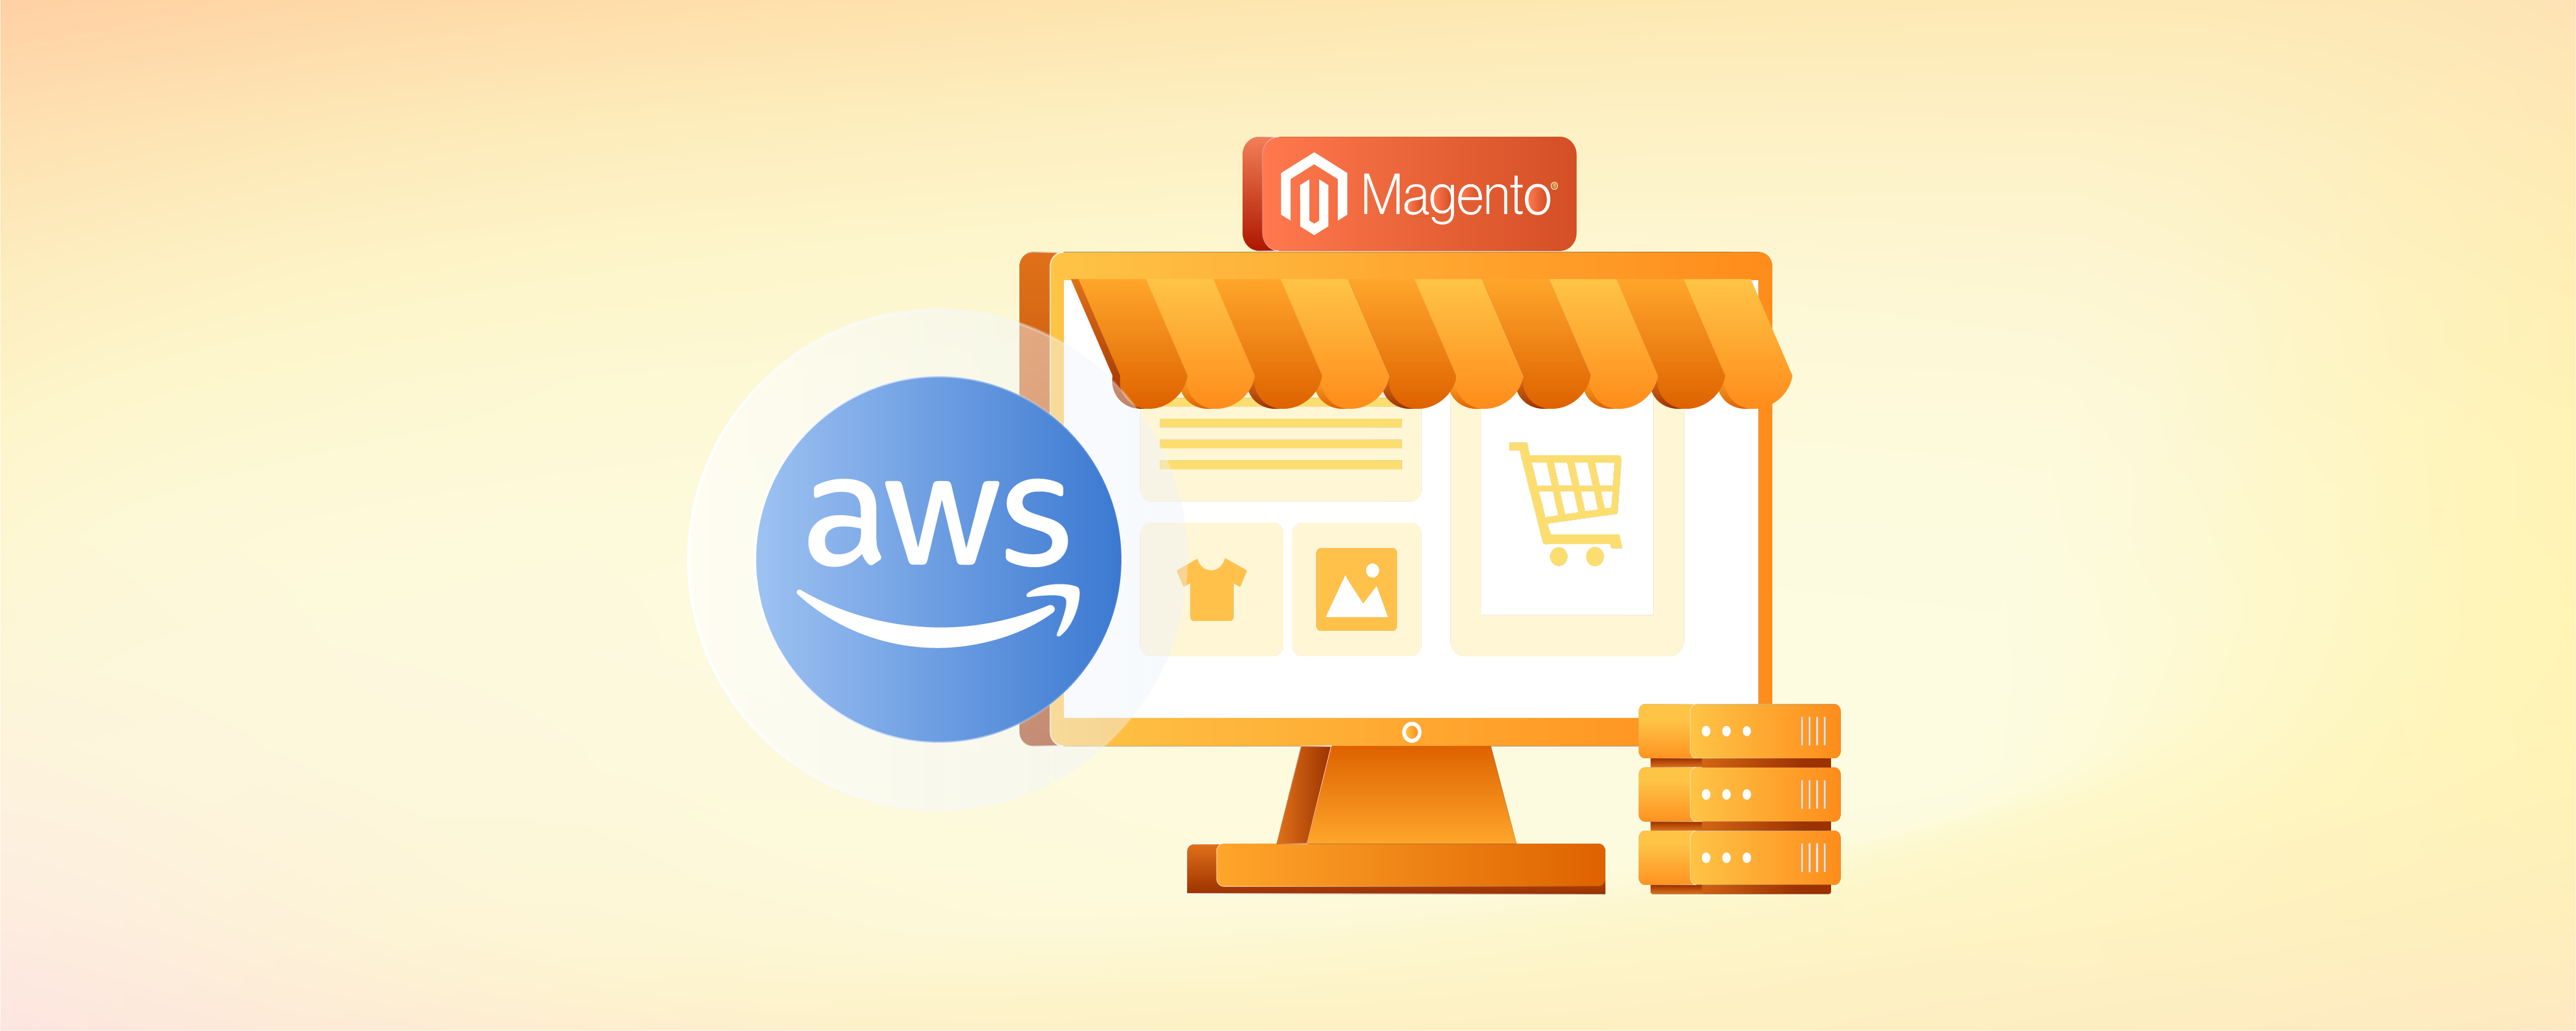 How to Launch Your Magento Store on Amazon Magento Hosting?